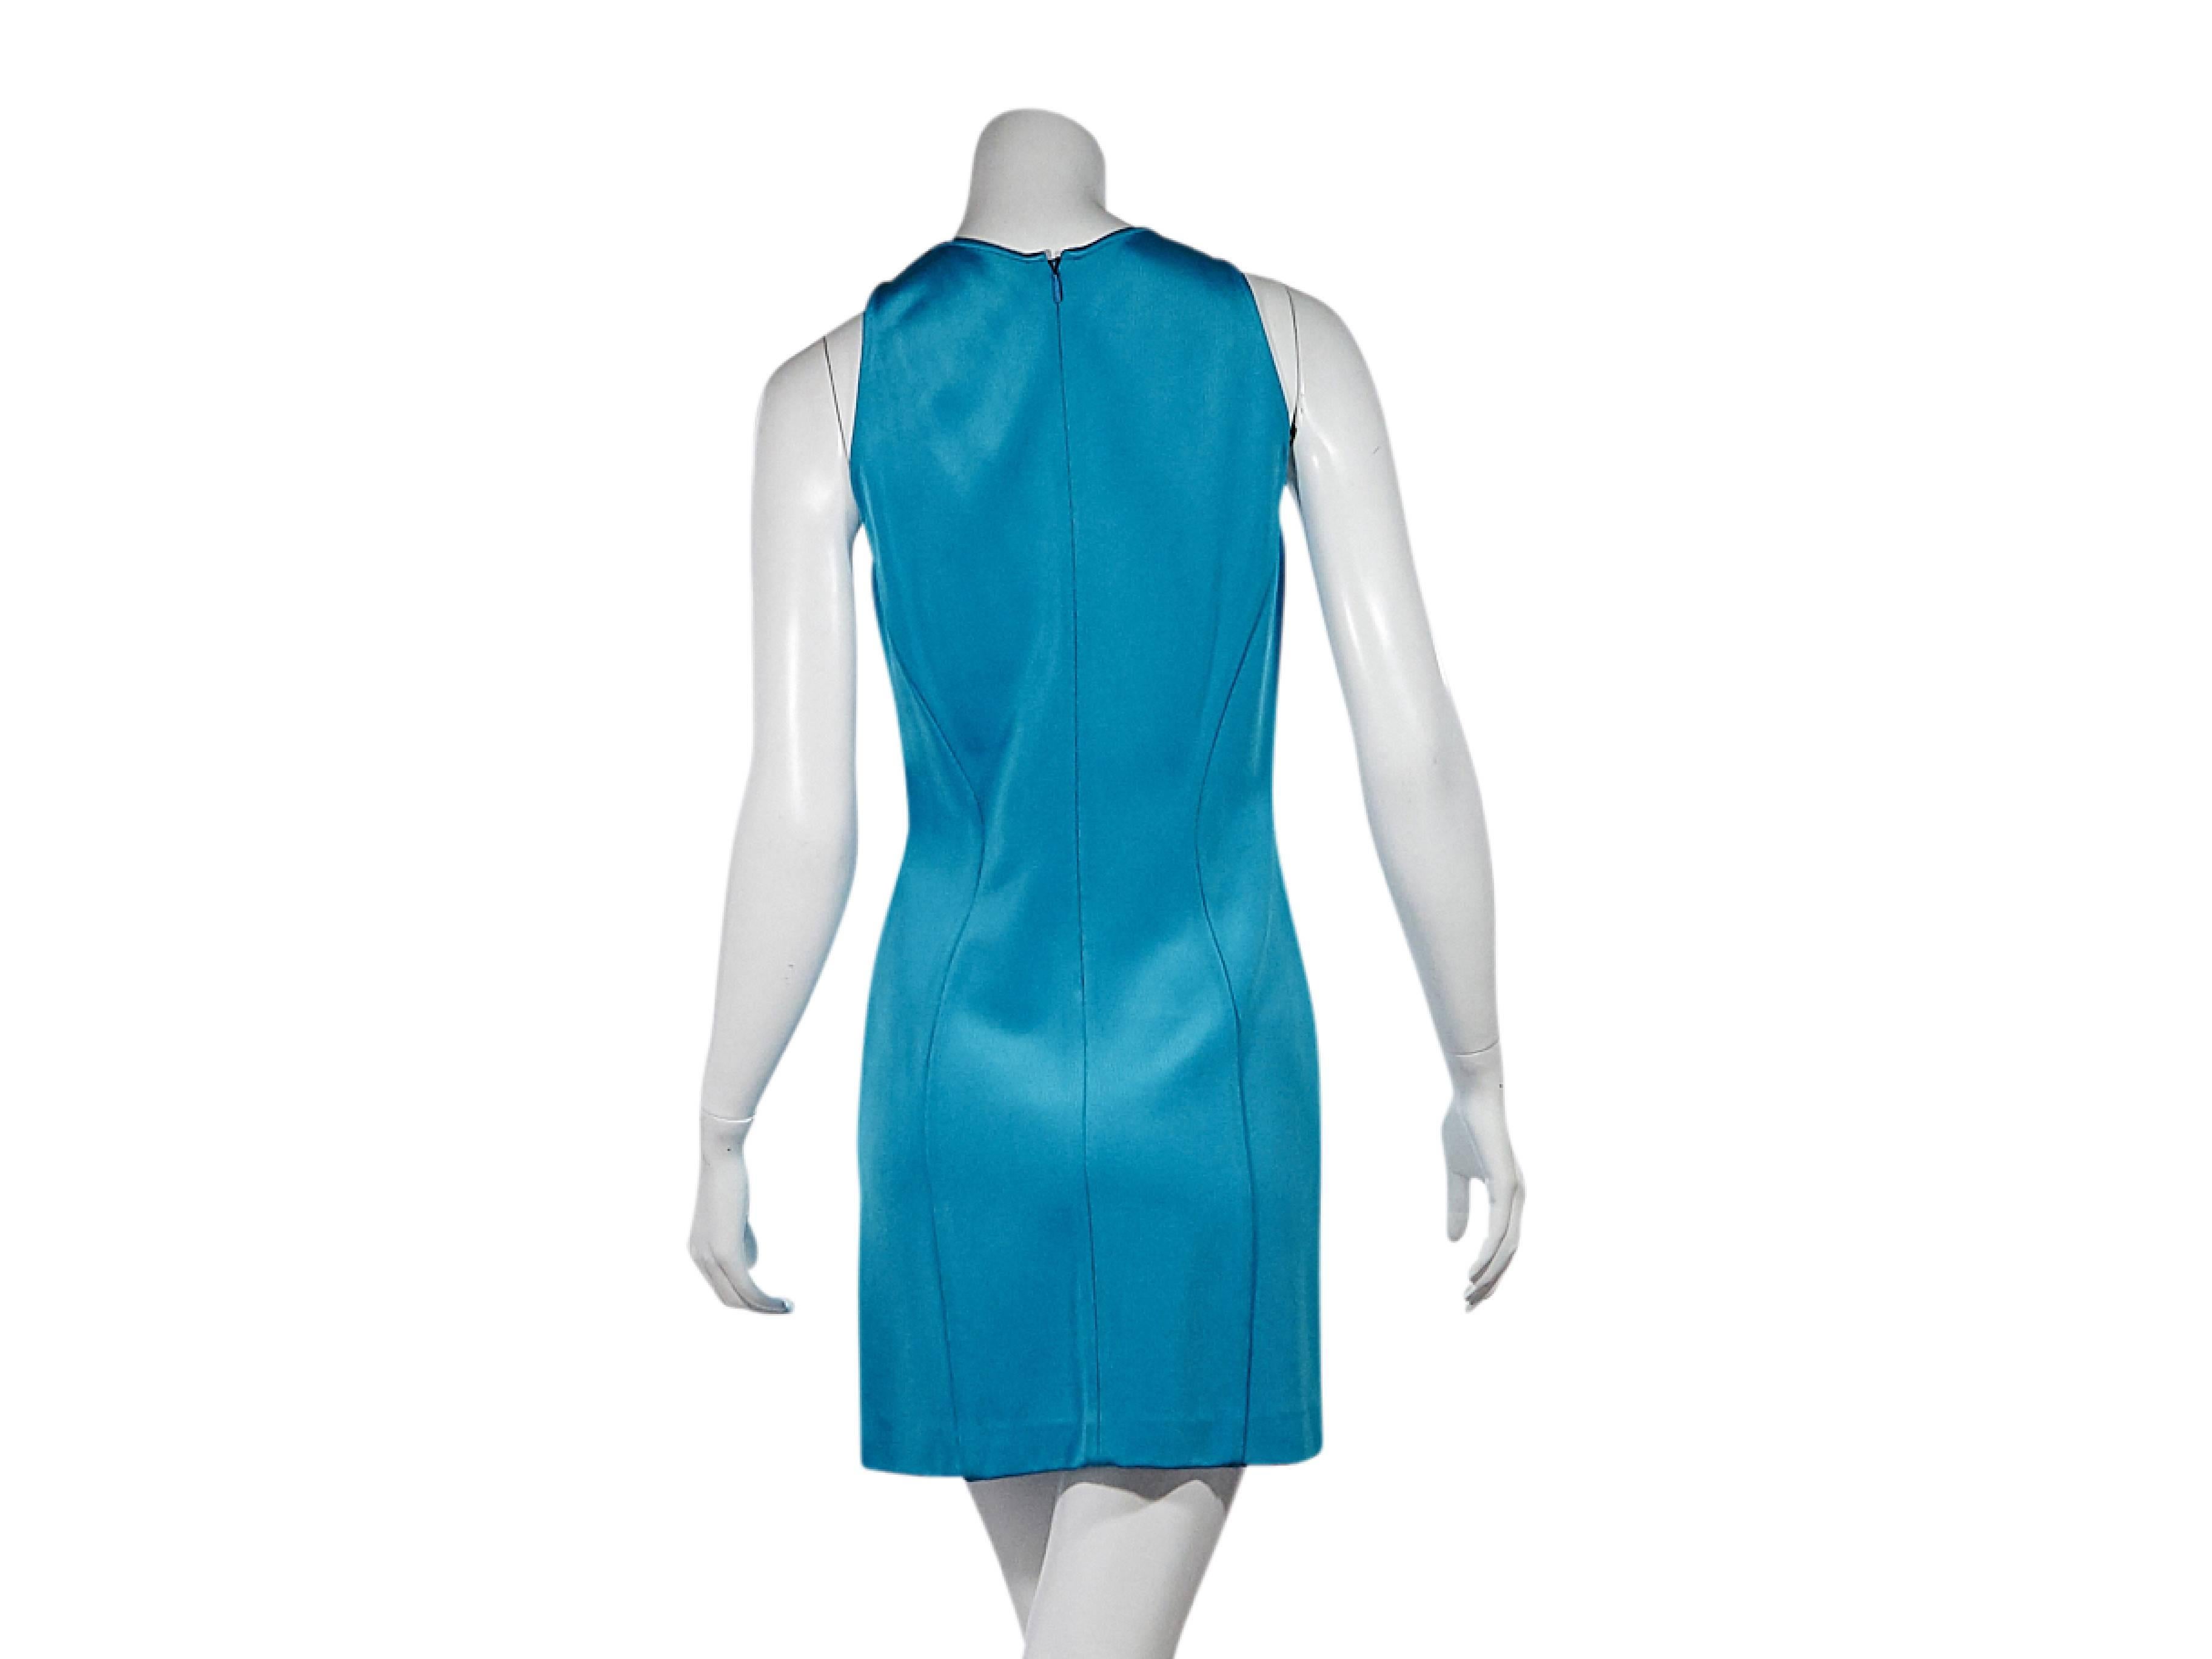 Product details: Blue sheath dress by Versace. Accented with goldtone buttons. Jewelneck. Sleeveless. Flattering seam details. Concealed back zip closure. 
Condition: Pre-owned. Very good.
Est. Retail: $ 698.00